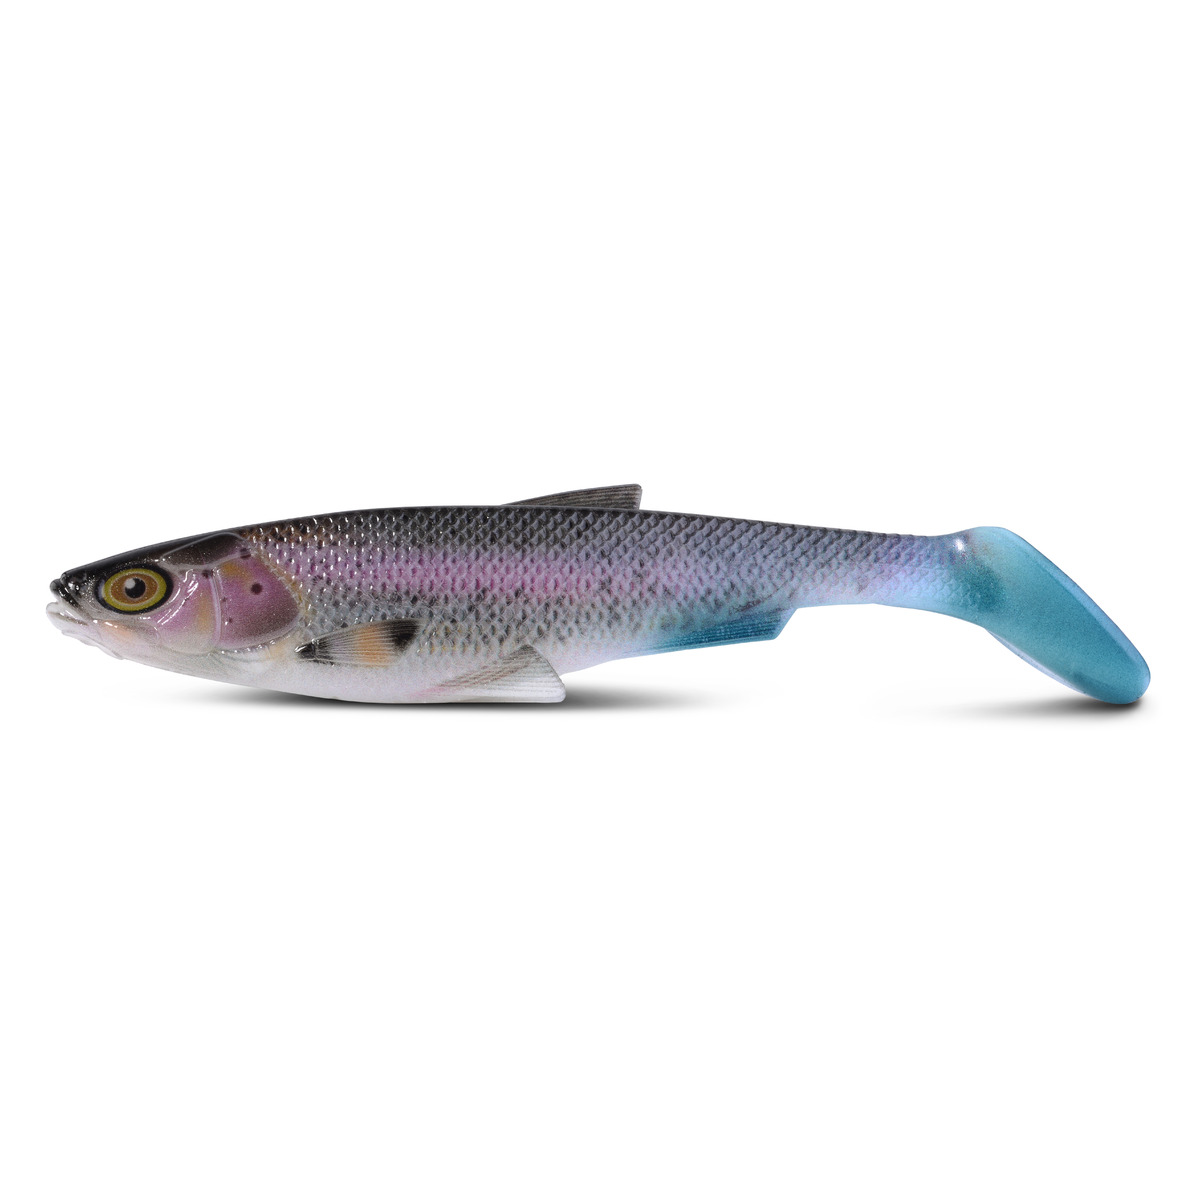 Iron Claw Belly Boy Ng Nature 10 Cm - Trucha arco iris